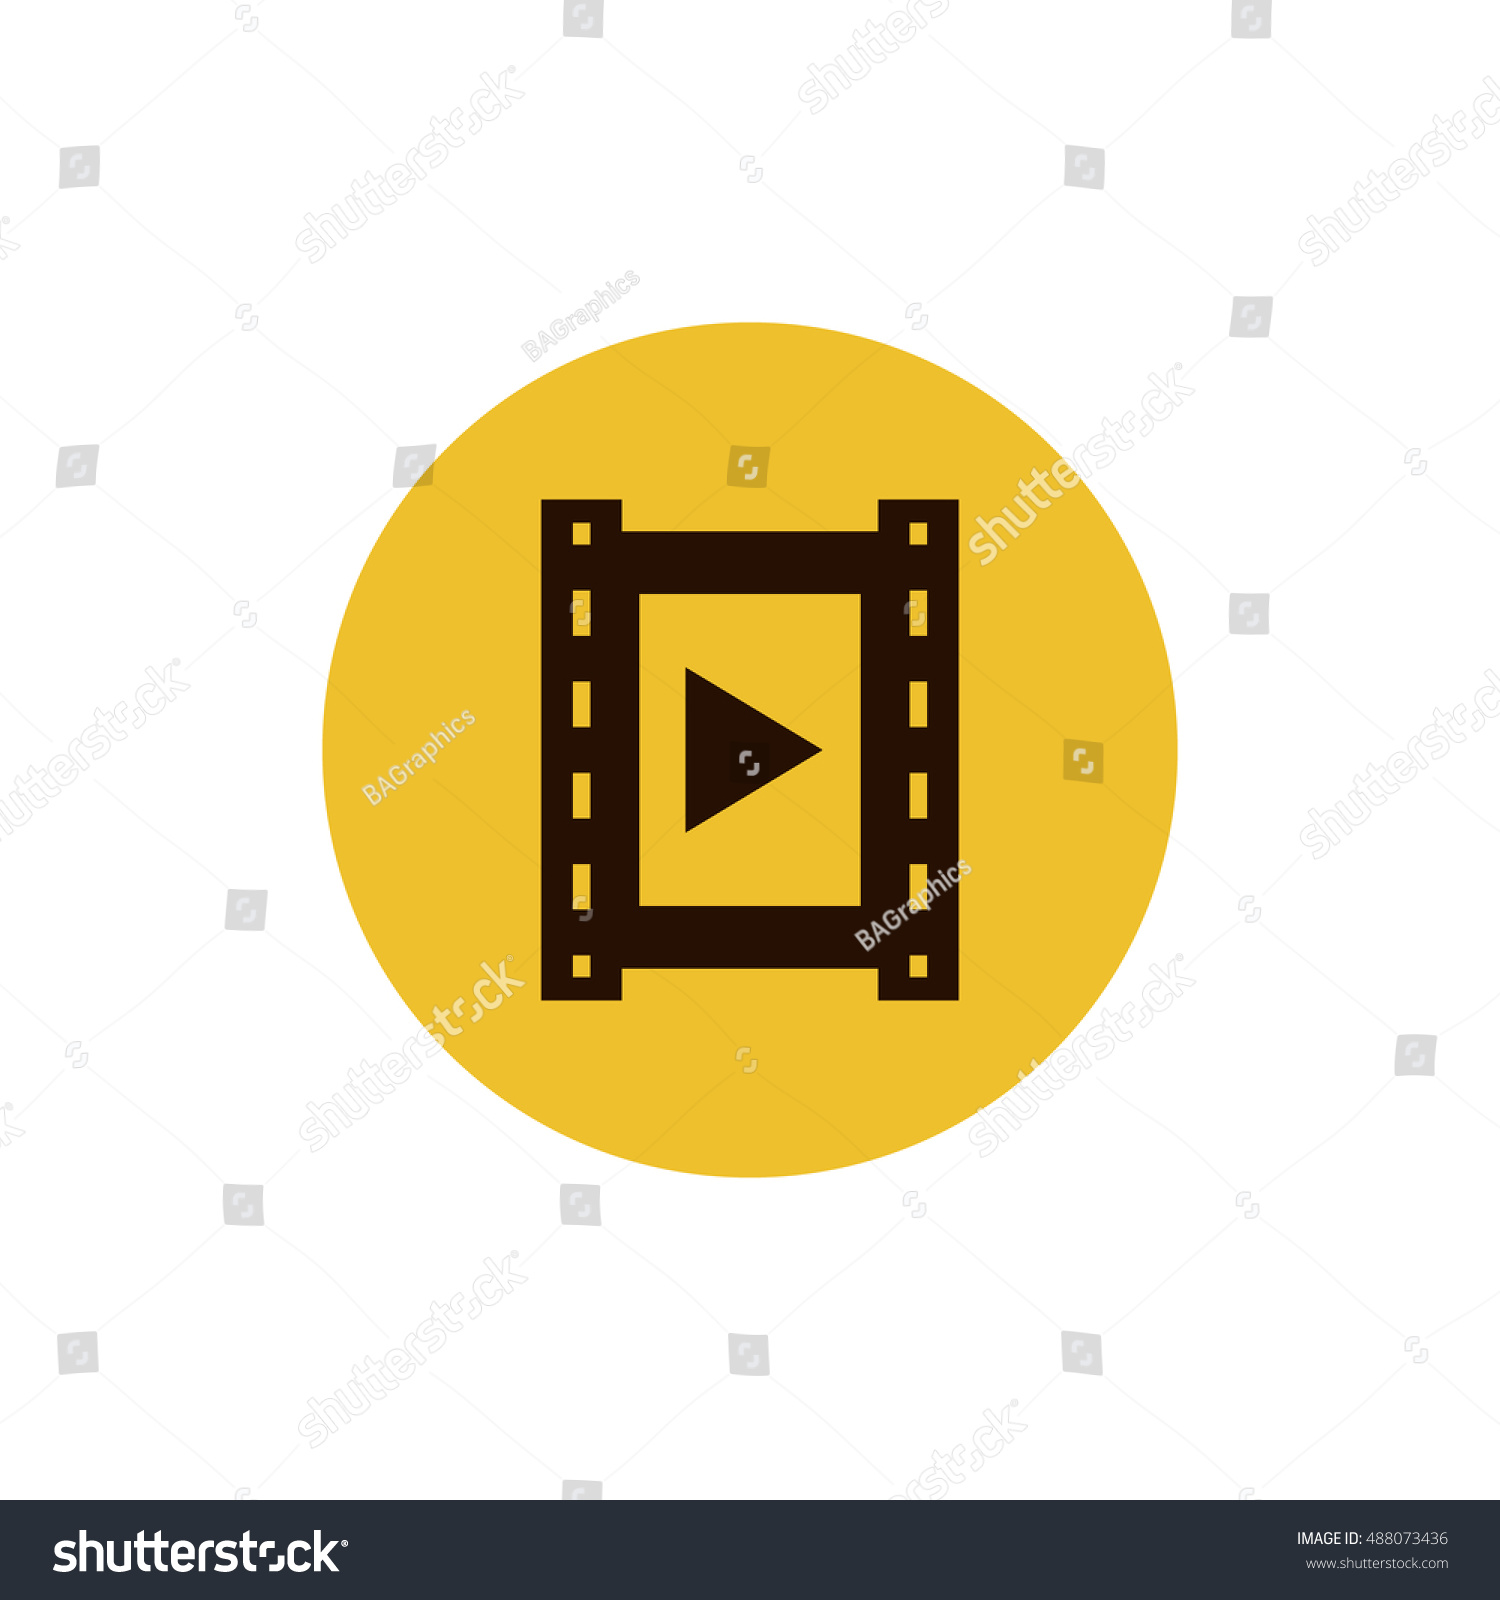 SVG of Video icon vector, clip art. Also useful as logo, circle app icon, web element, symbol, graphic image, silhouette and illustration. Compatible with ai, cdr, jpg, png, svg, pdf, ico  and eps formats. svg